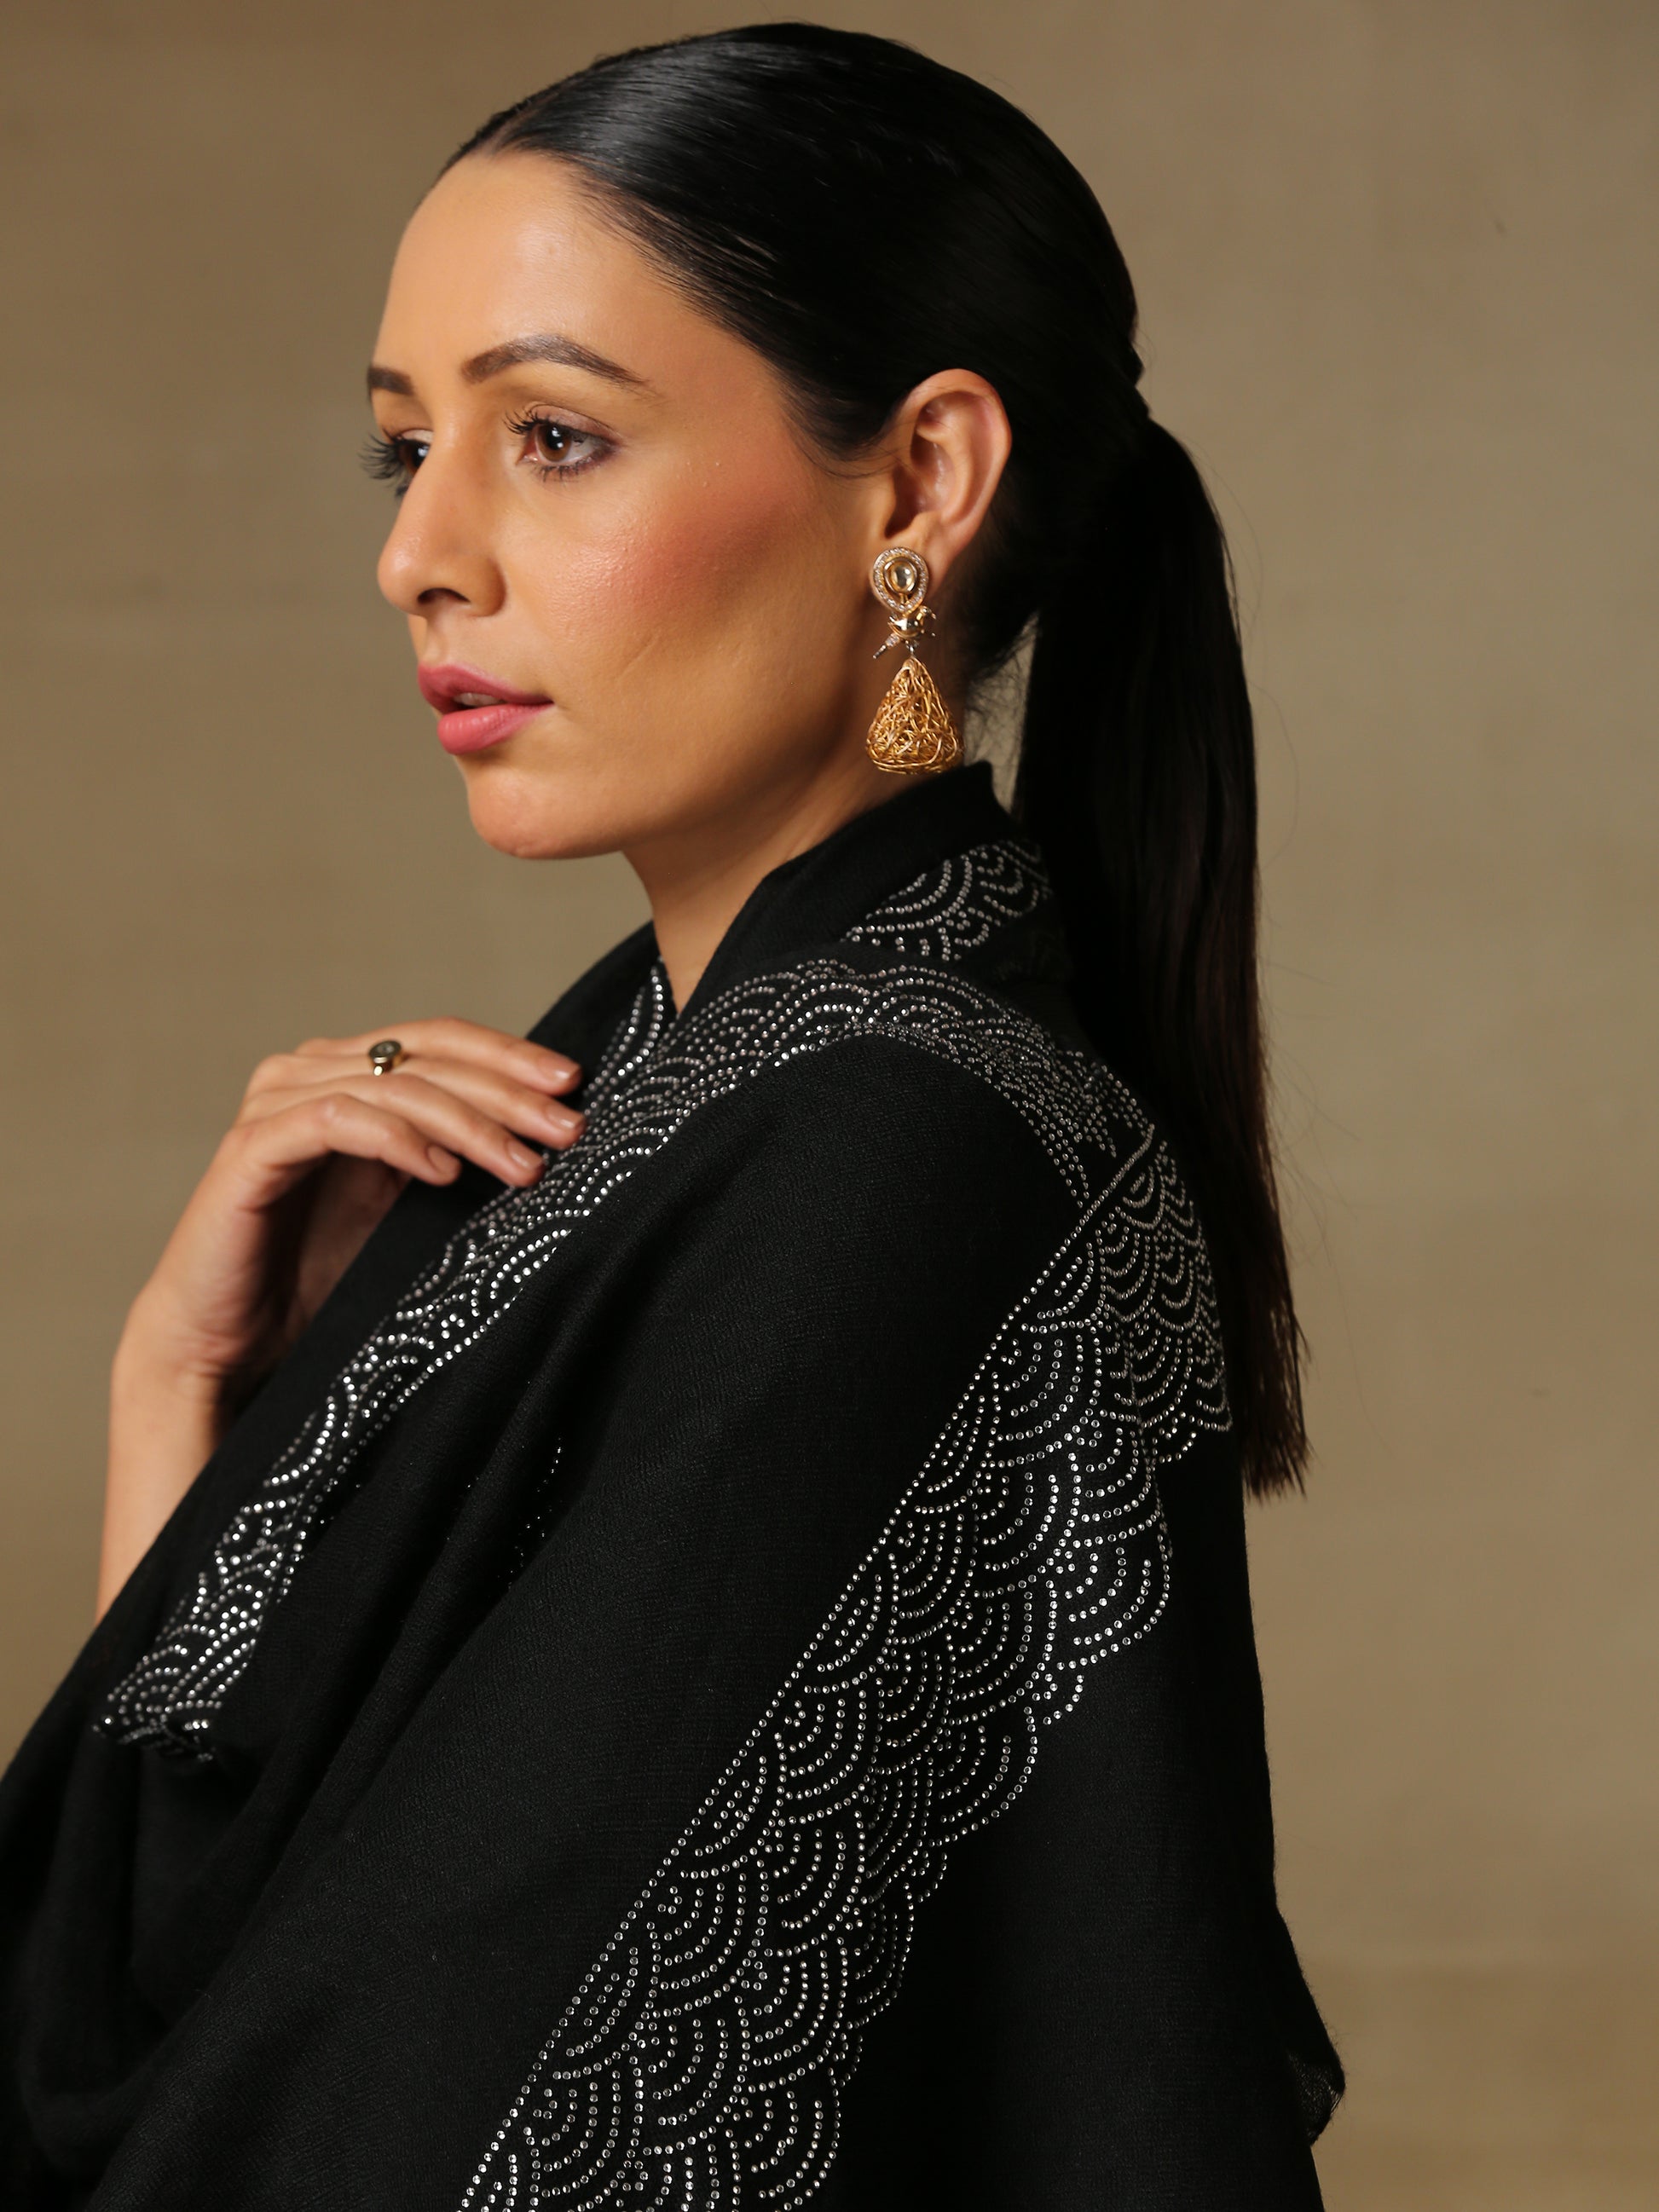 Model is wearing a black stole from the Era of Zaywar Border Swarovski Stole collection, hand embellished with silver swarovski in a clouds design.